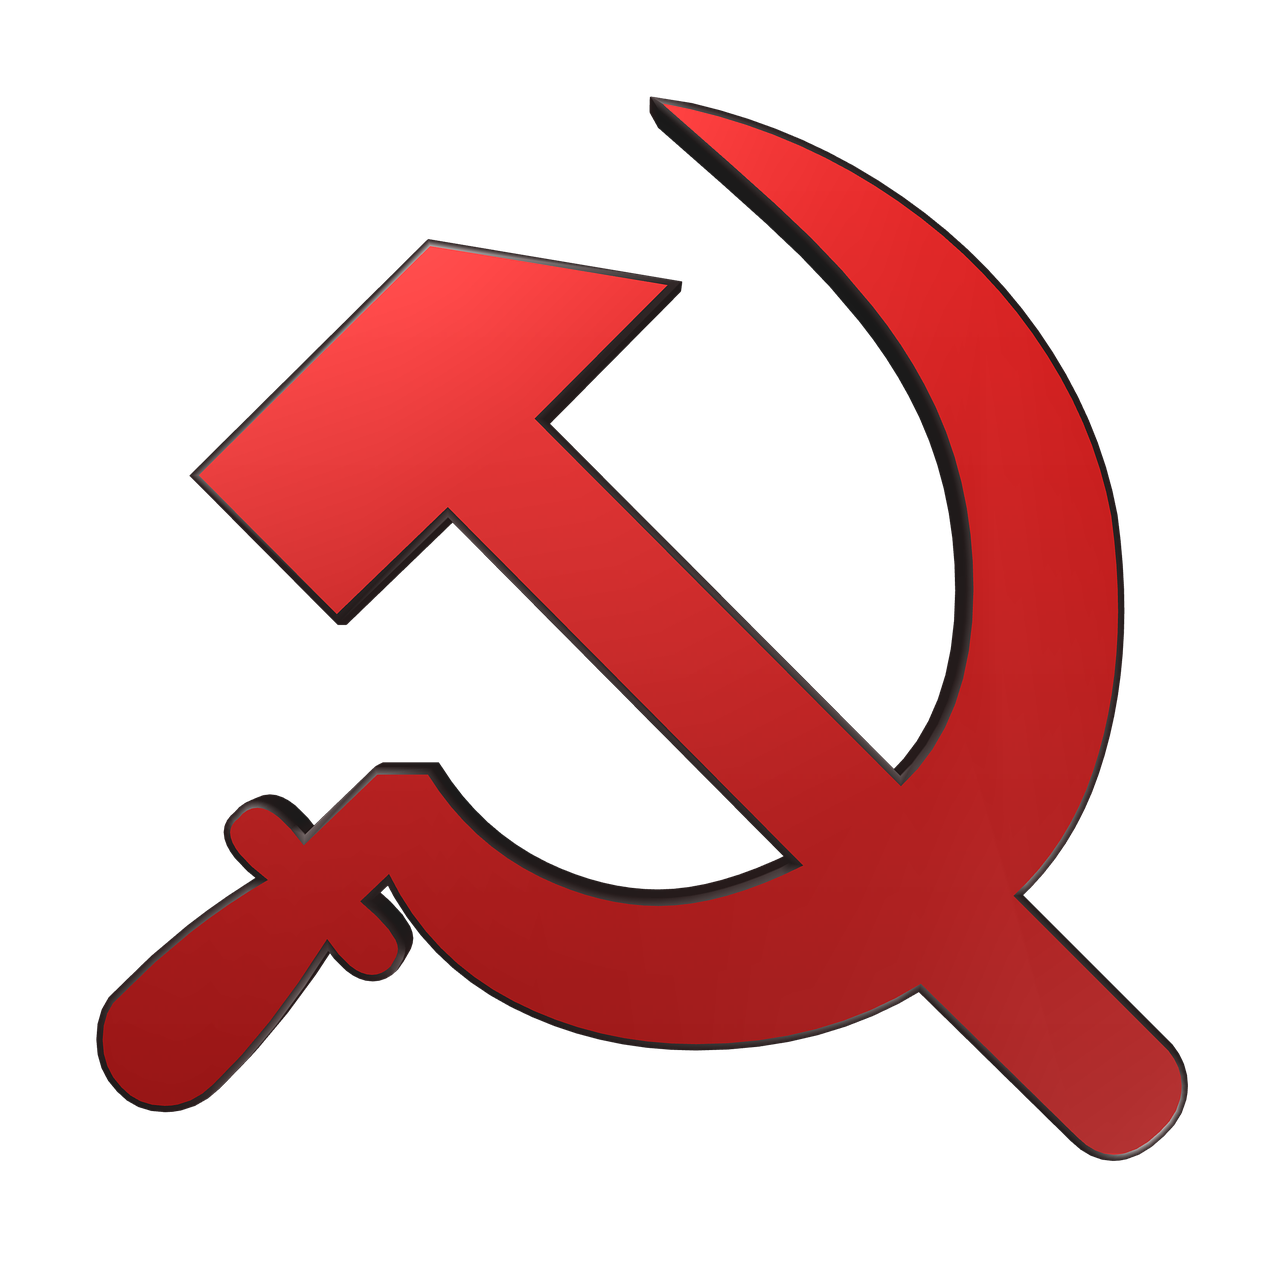 hammer and sickle russia emblem free photo